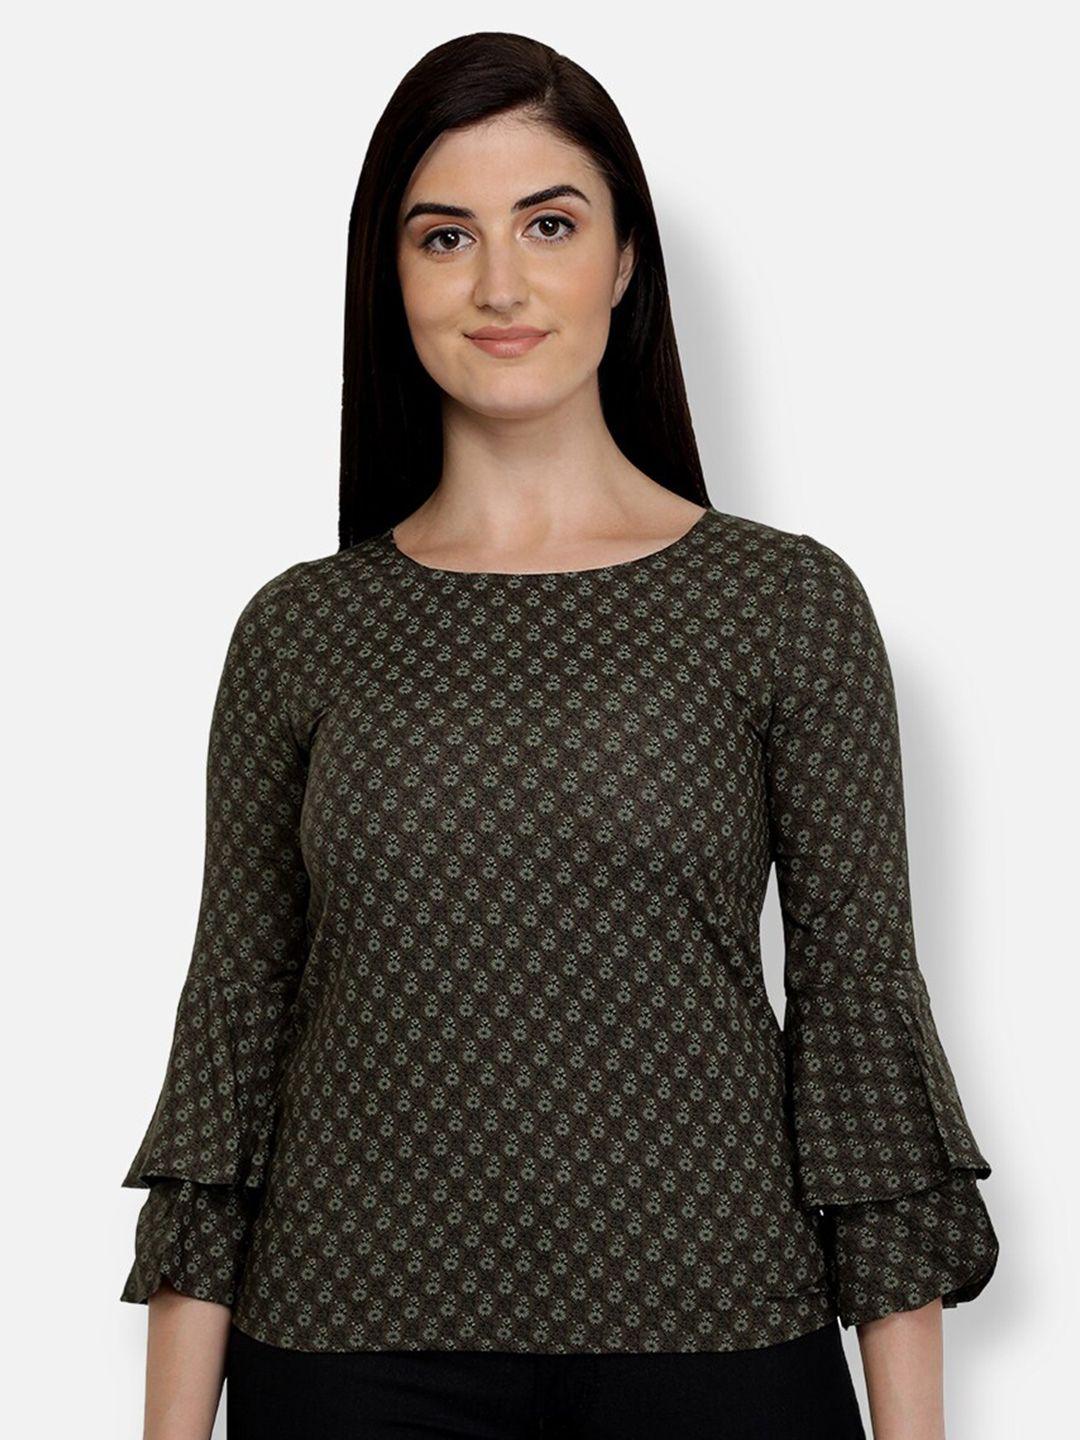 ashtag-olive-green-printed-pure-cotton-top